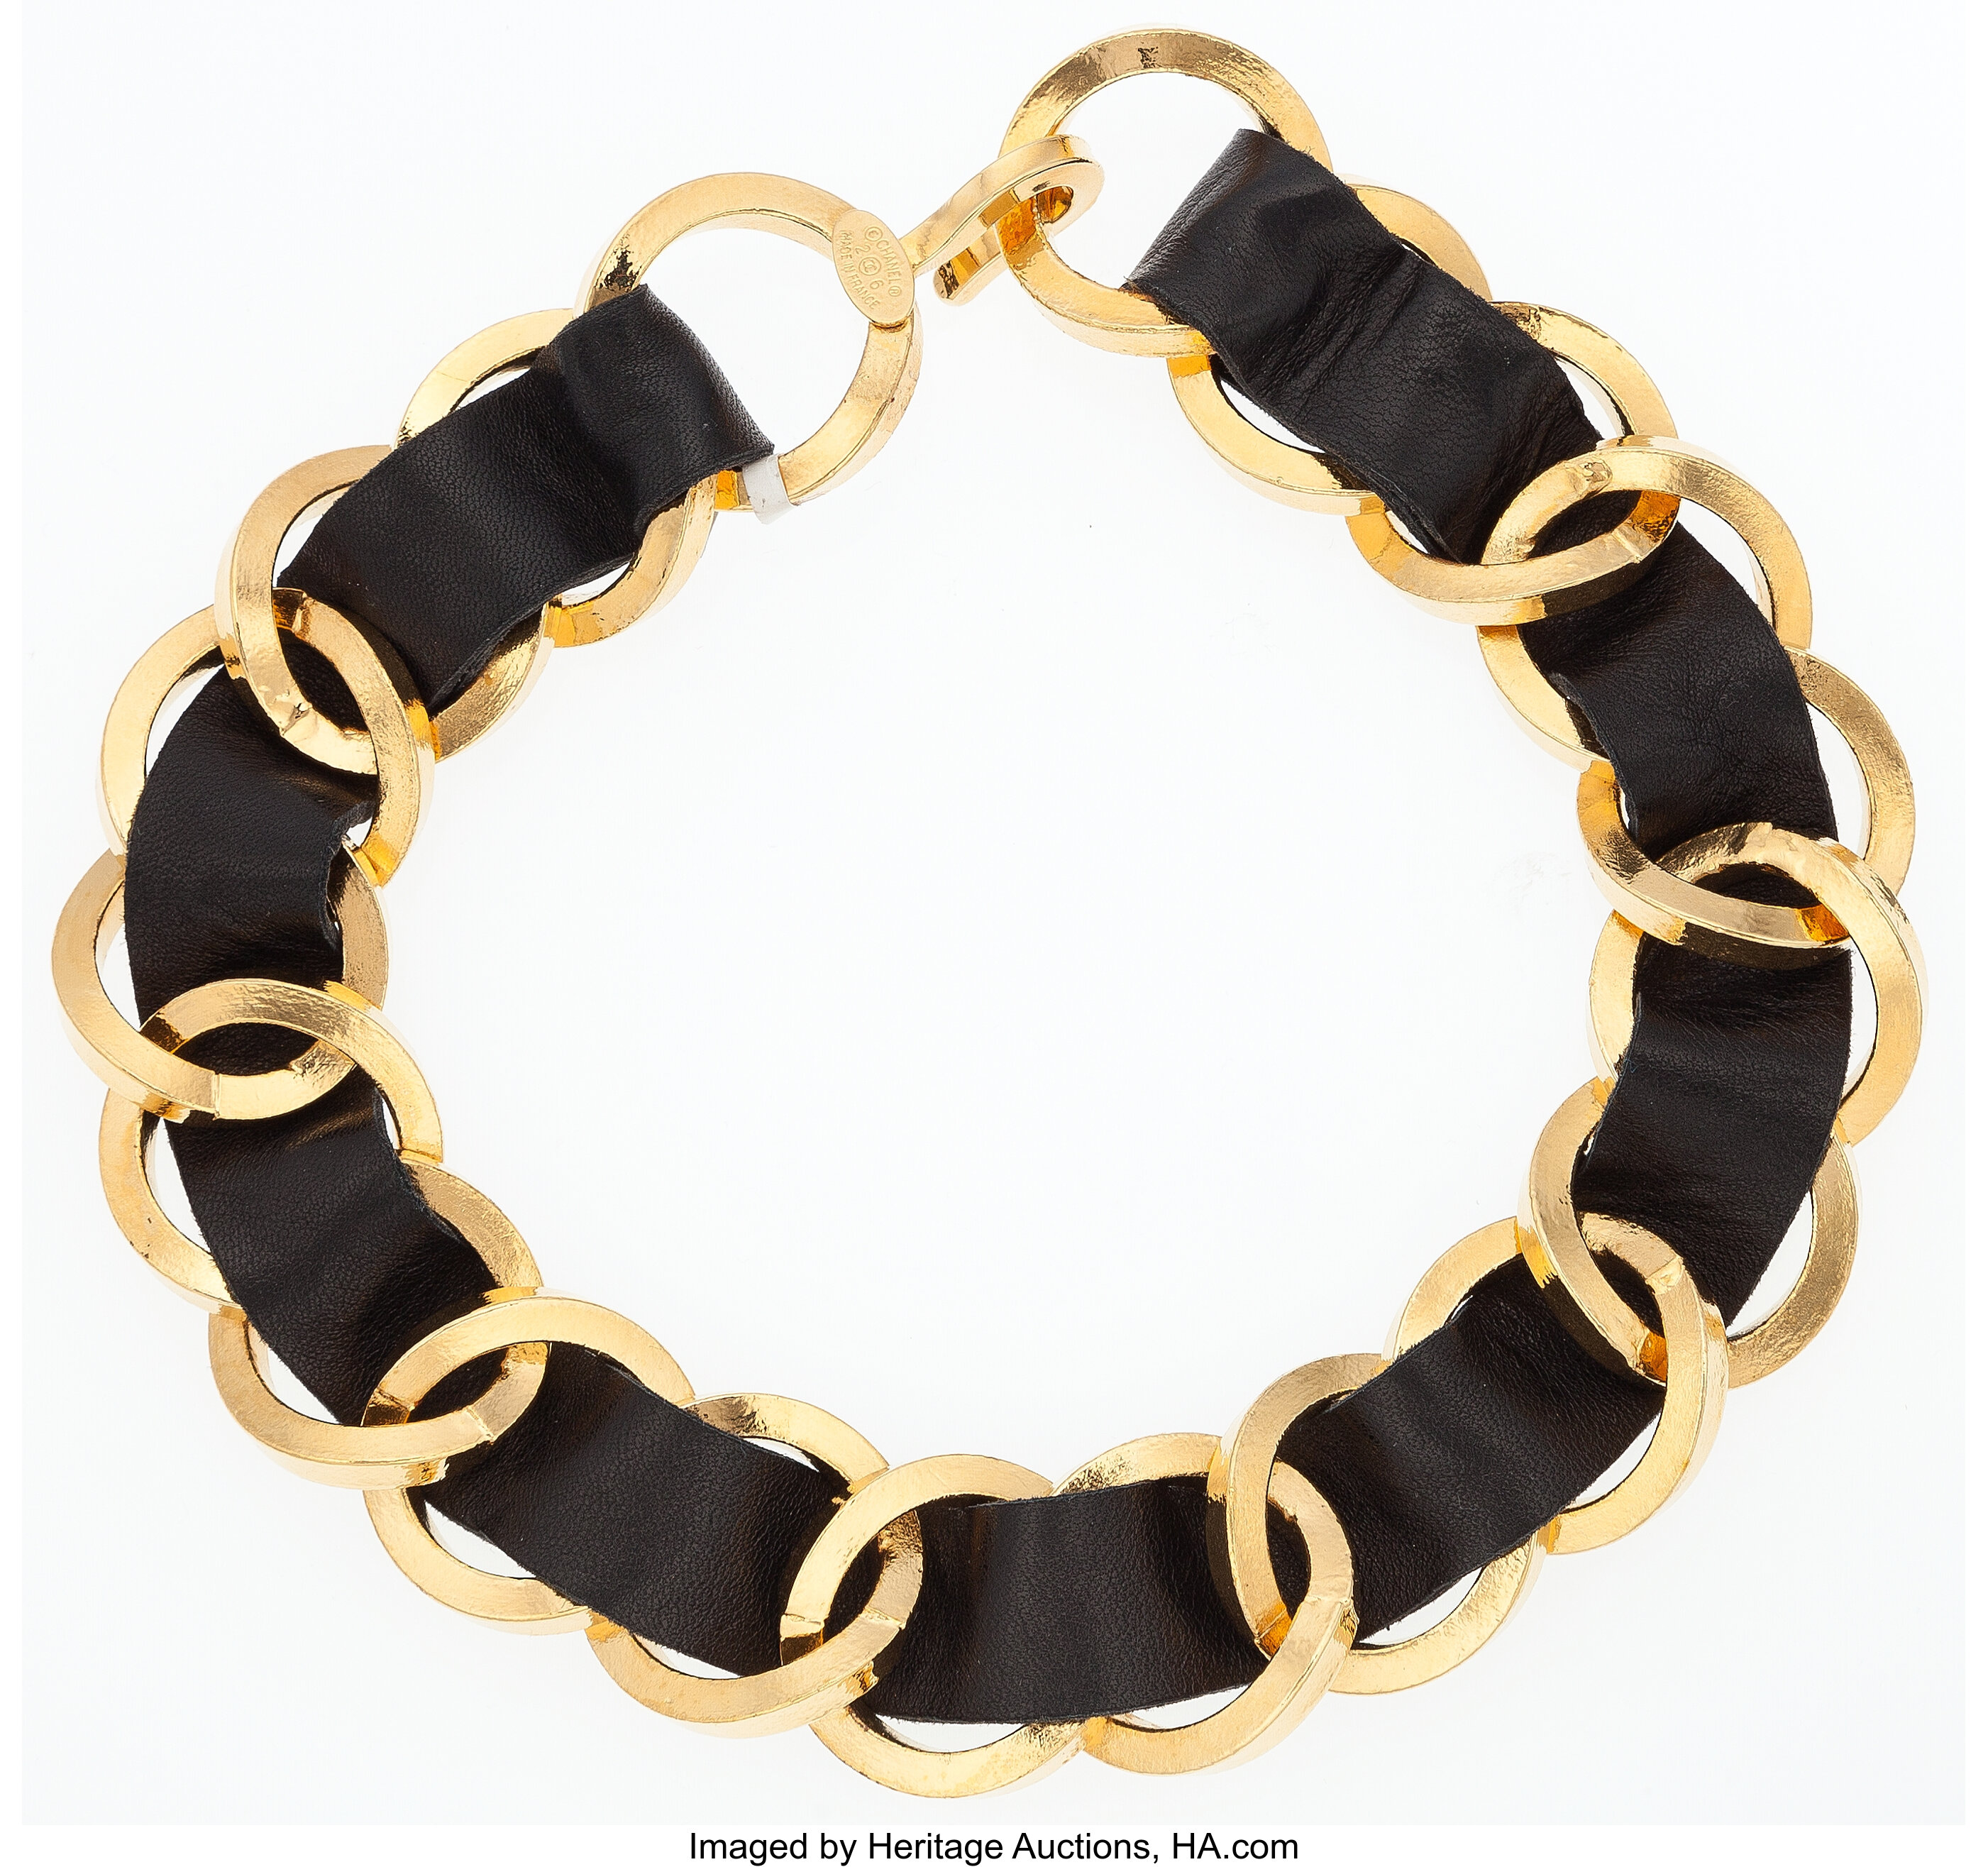 Get the best deals on CHANEL Leather Gold Fashion Necklaces